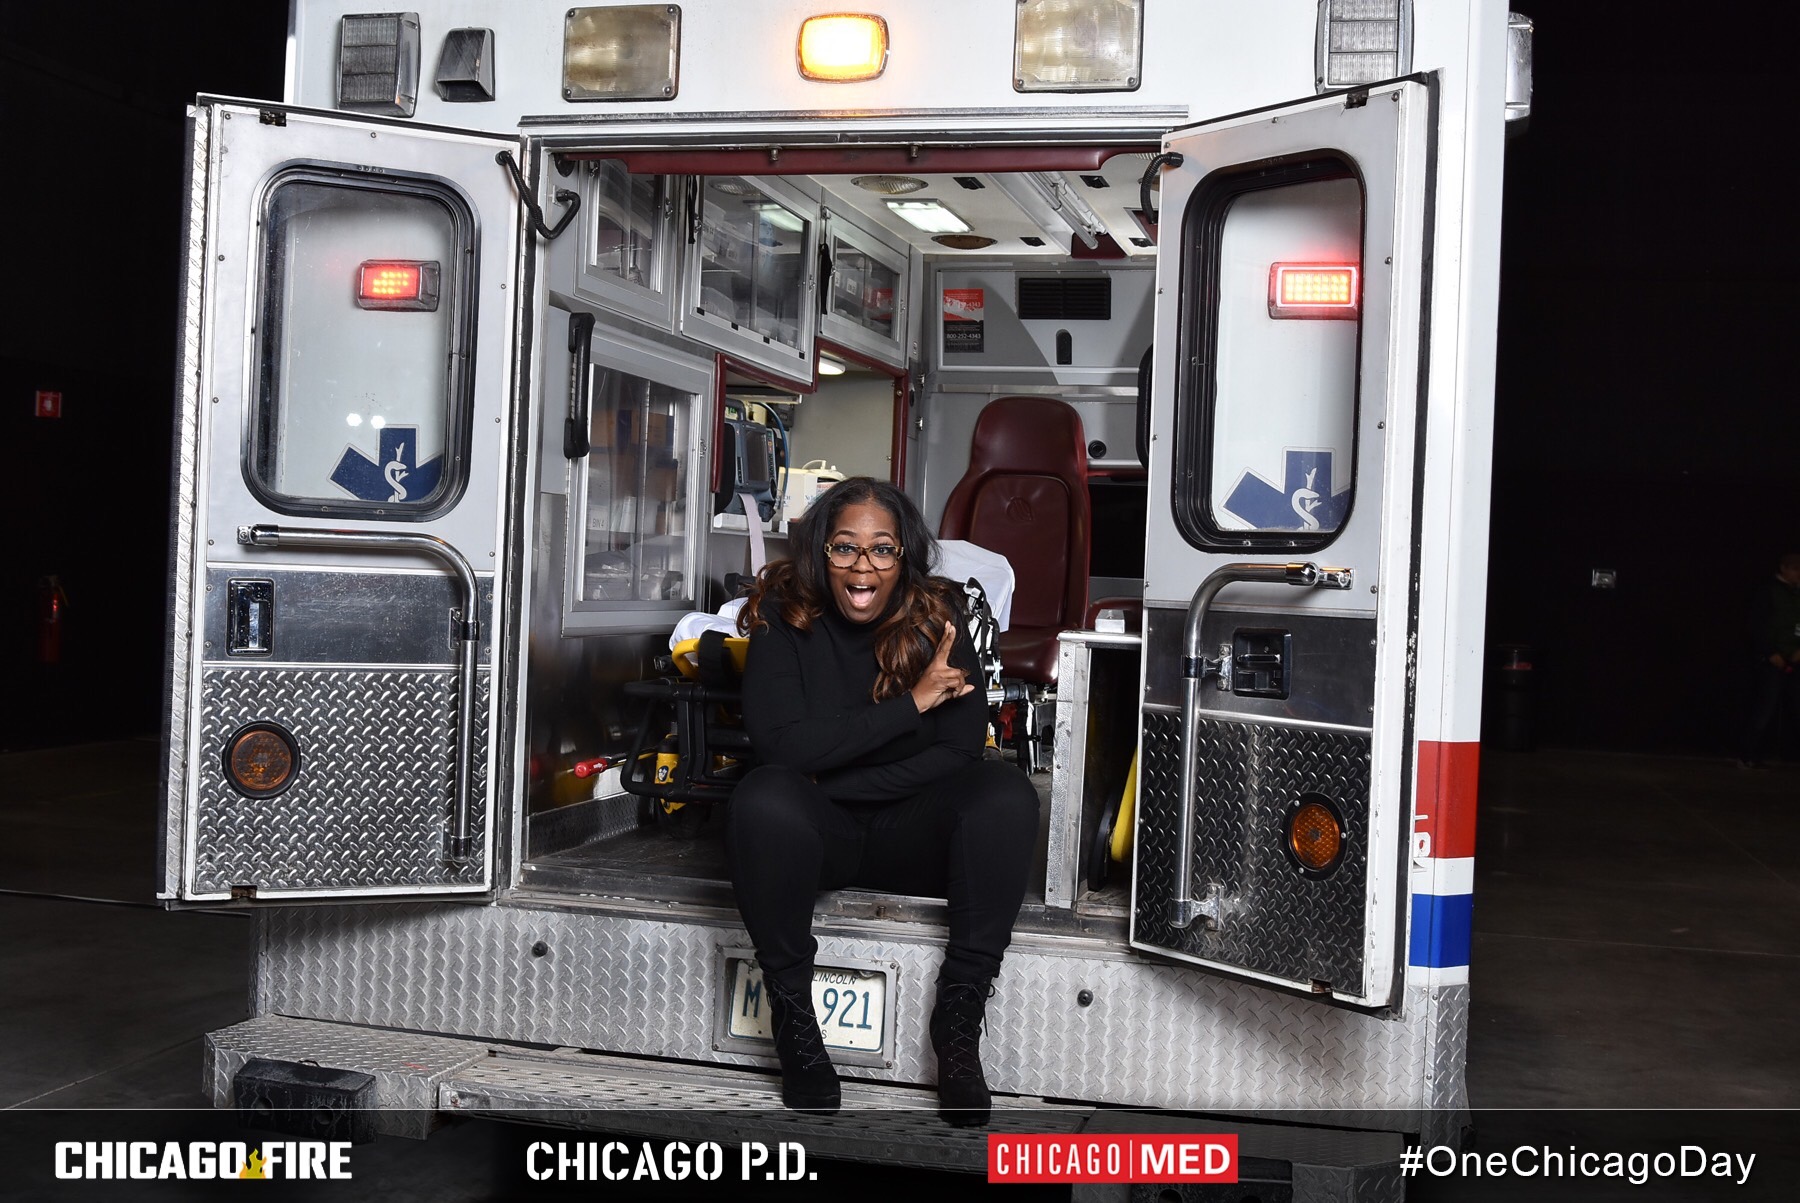 One Chicago Day Live Demos From NBC’s Chicago Med, Chicago P.D. & Chicago Fire